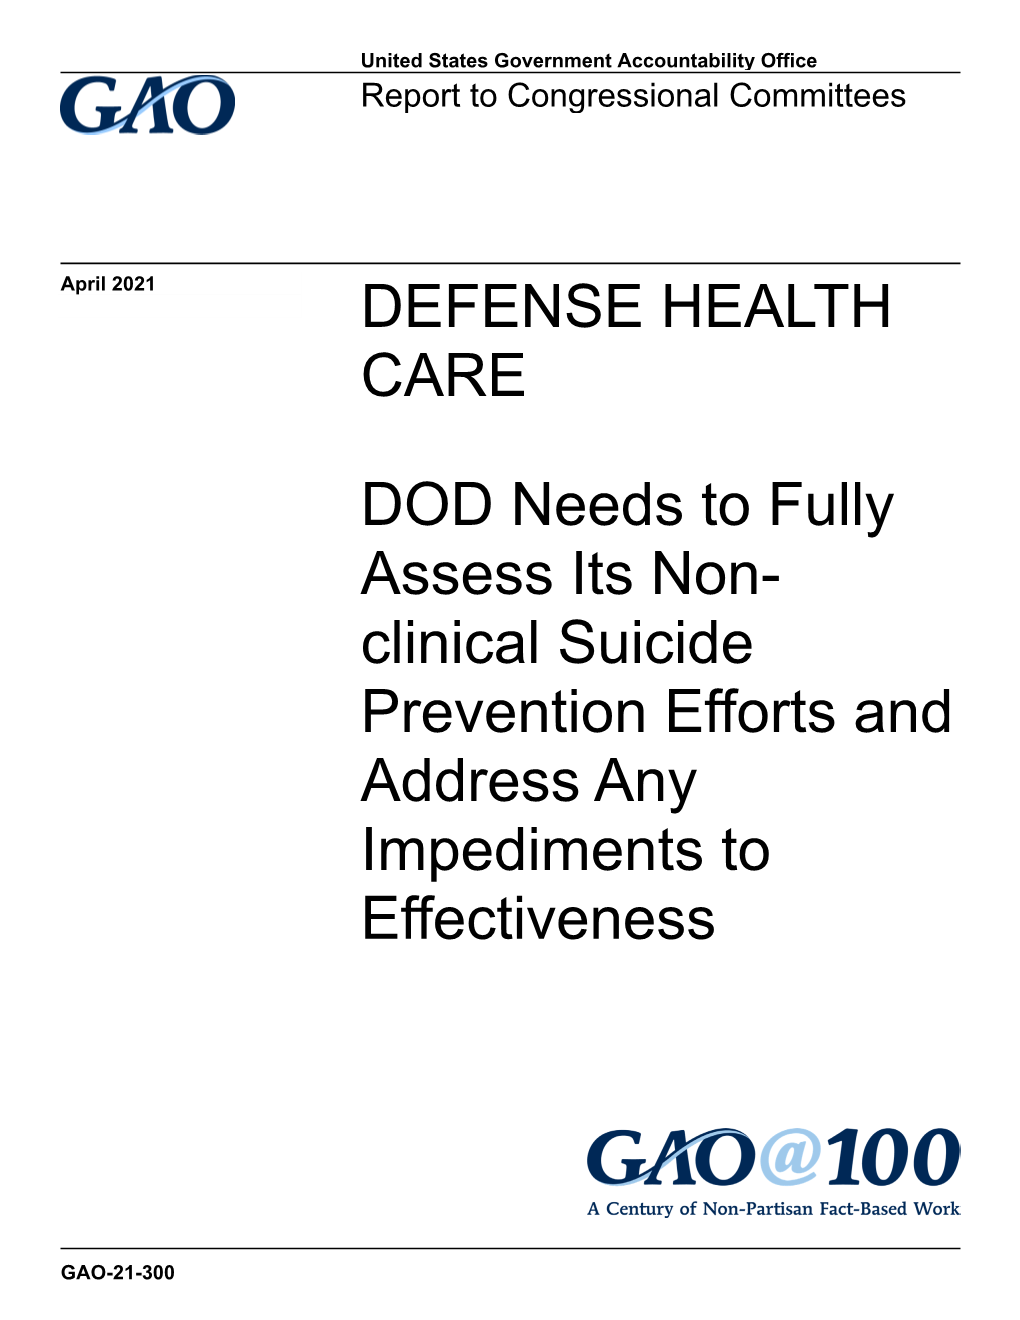 DOD Needs to Fully Assess Its Non-Clinical Suicide Prevention Efforts and Address Any Impediments To